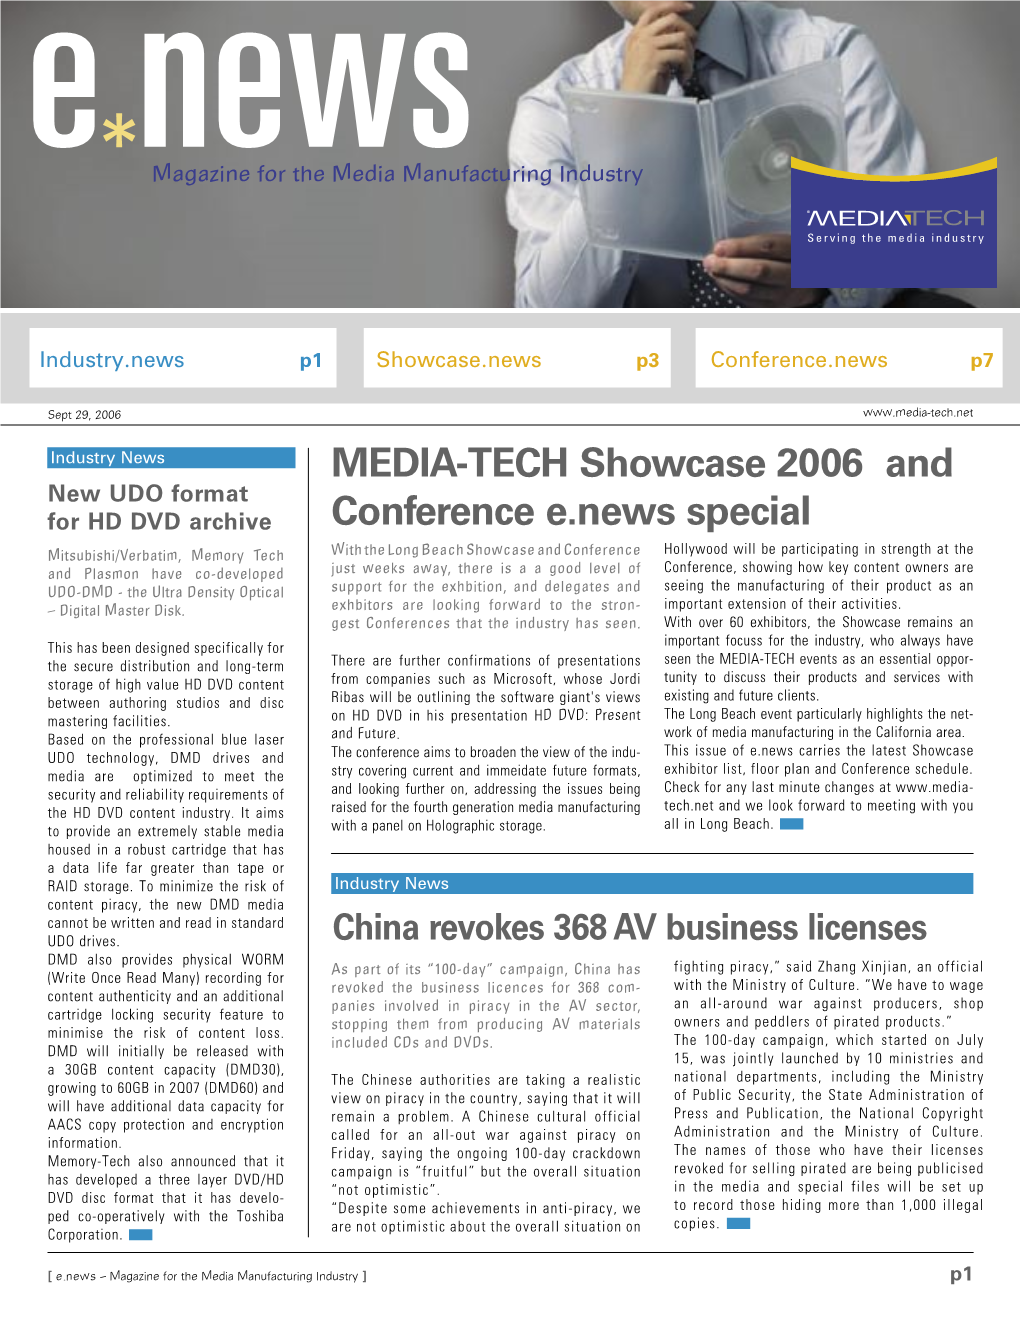 MEDIA-TECH Showcase 2006 and Conference E.News Special